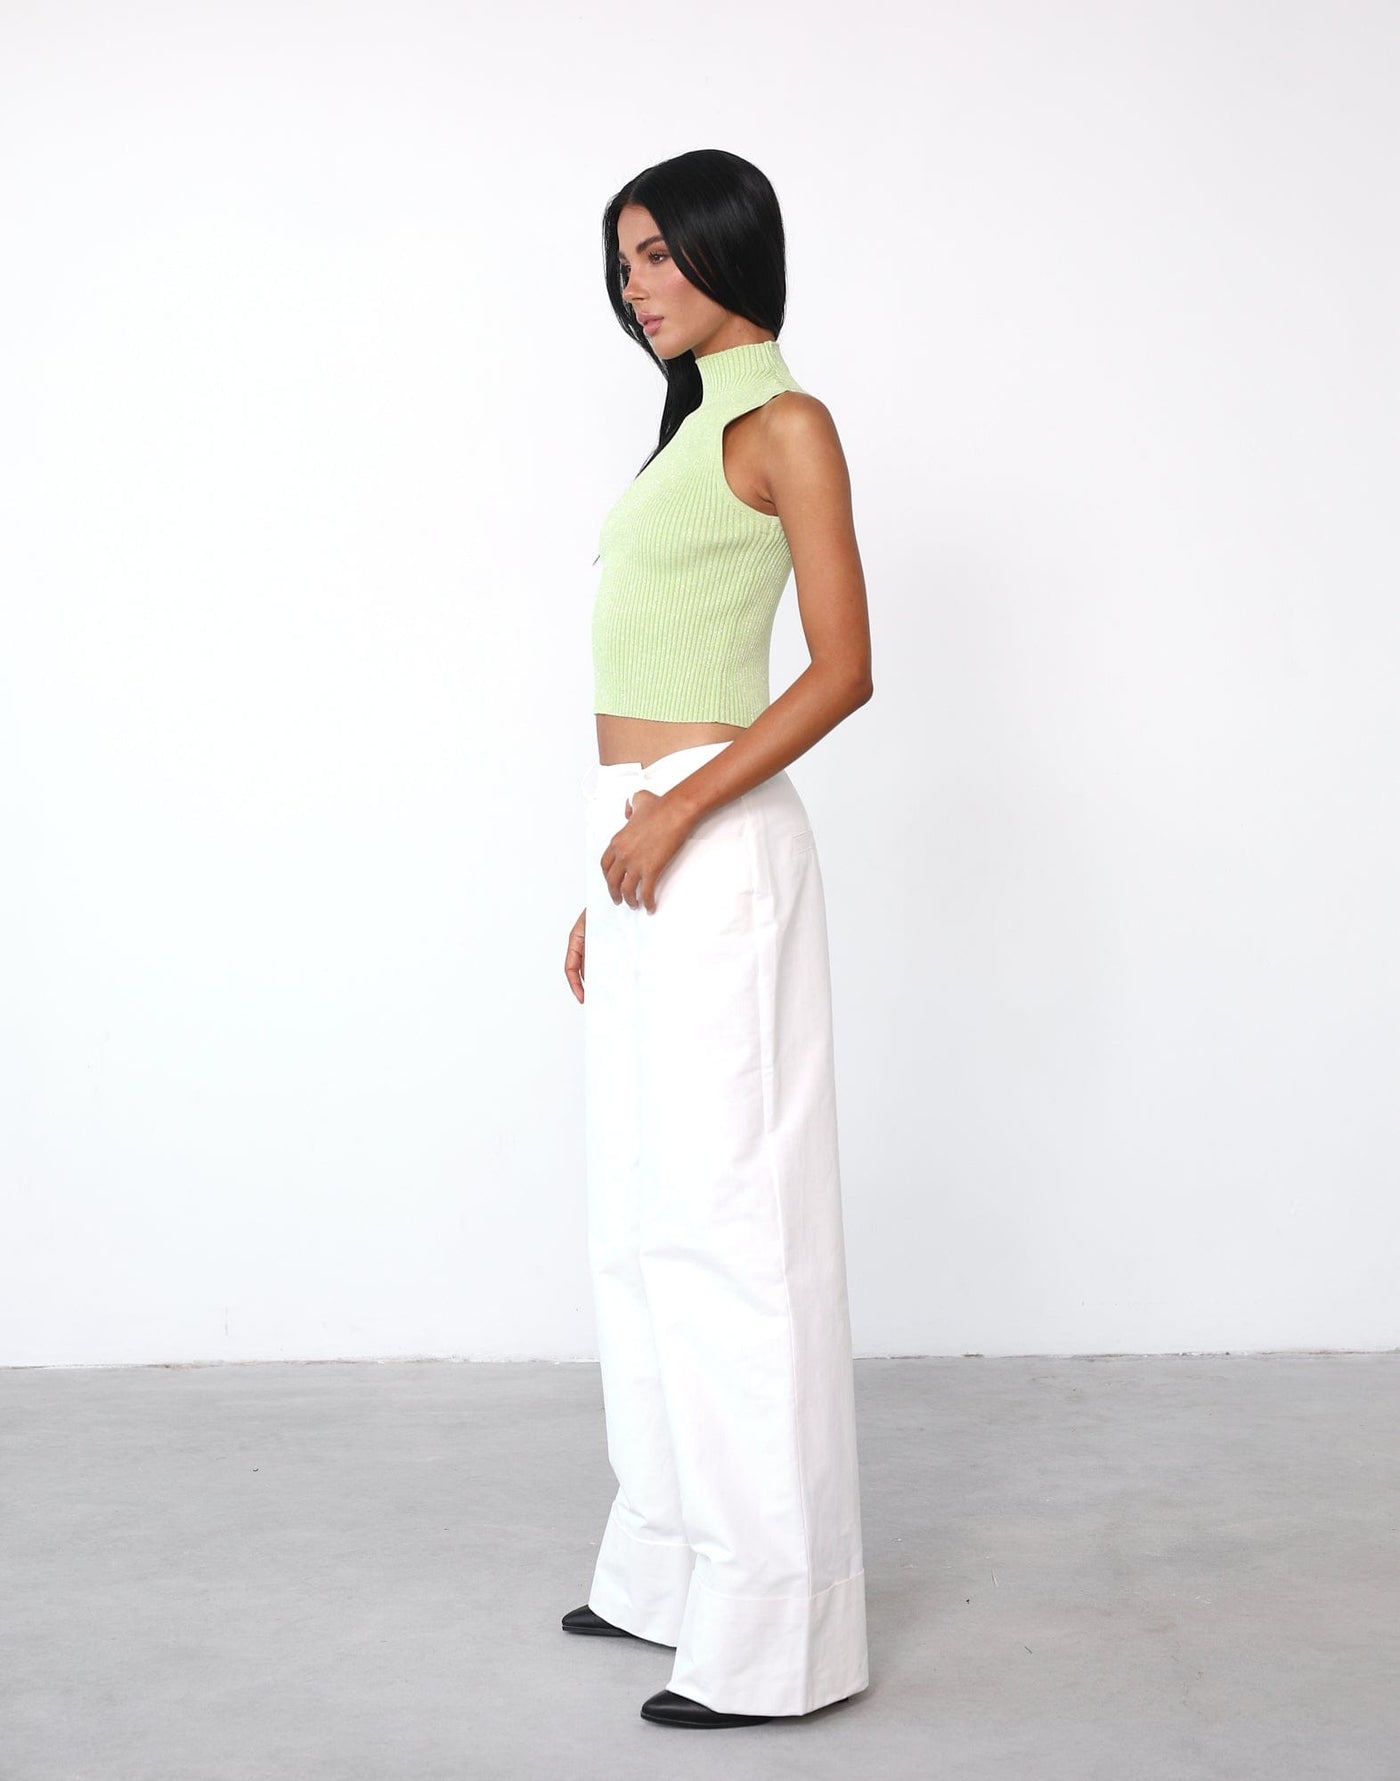 Lorelai Tank Top (Lime Green) - High Neck Ribbed Knit Top - Women's Tops - Charcoal Clothing